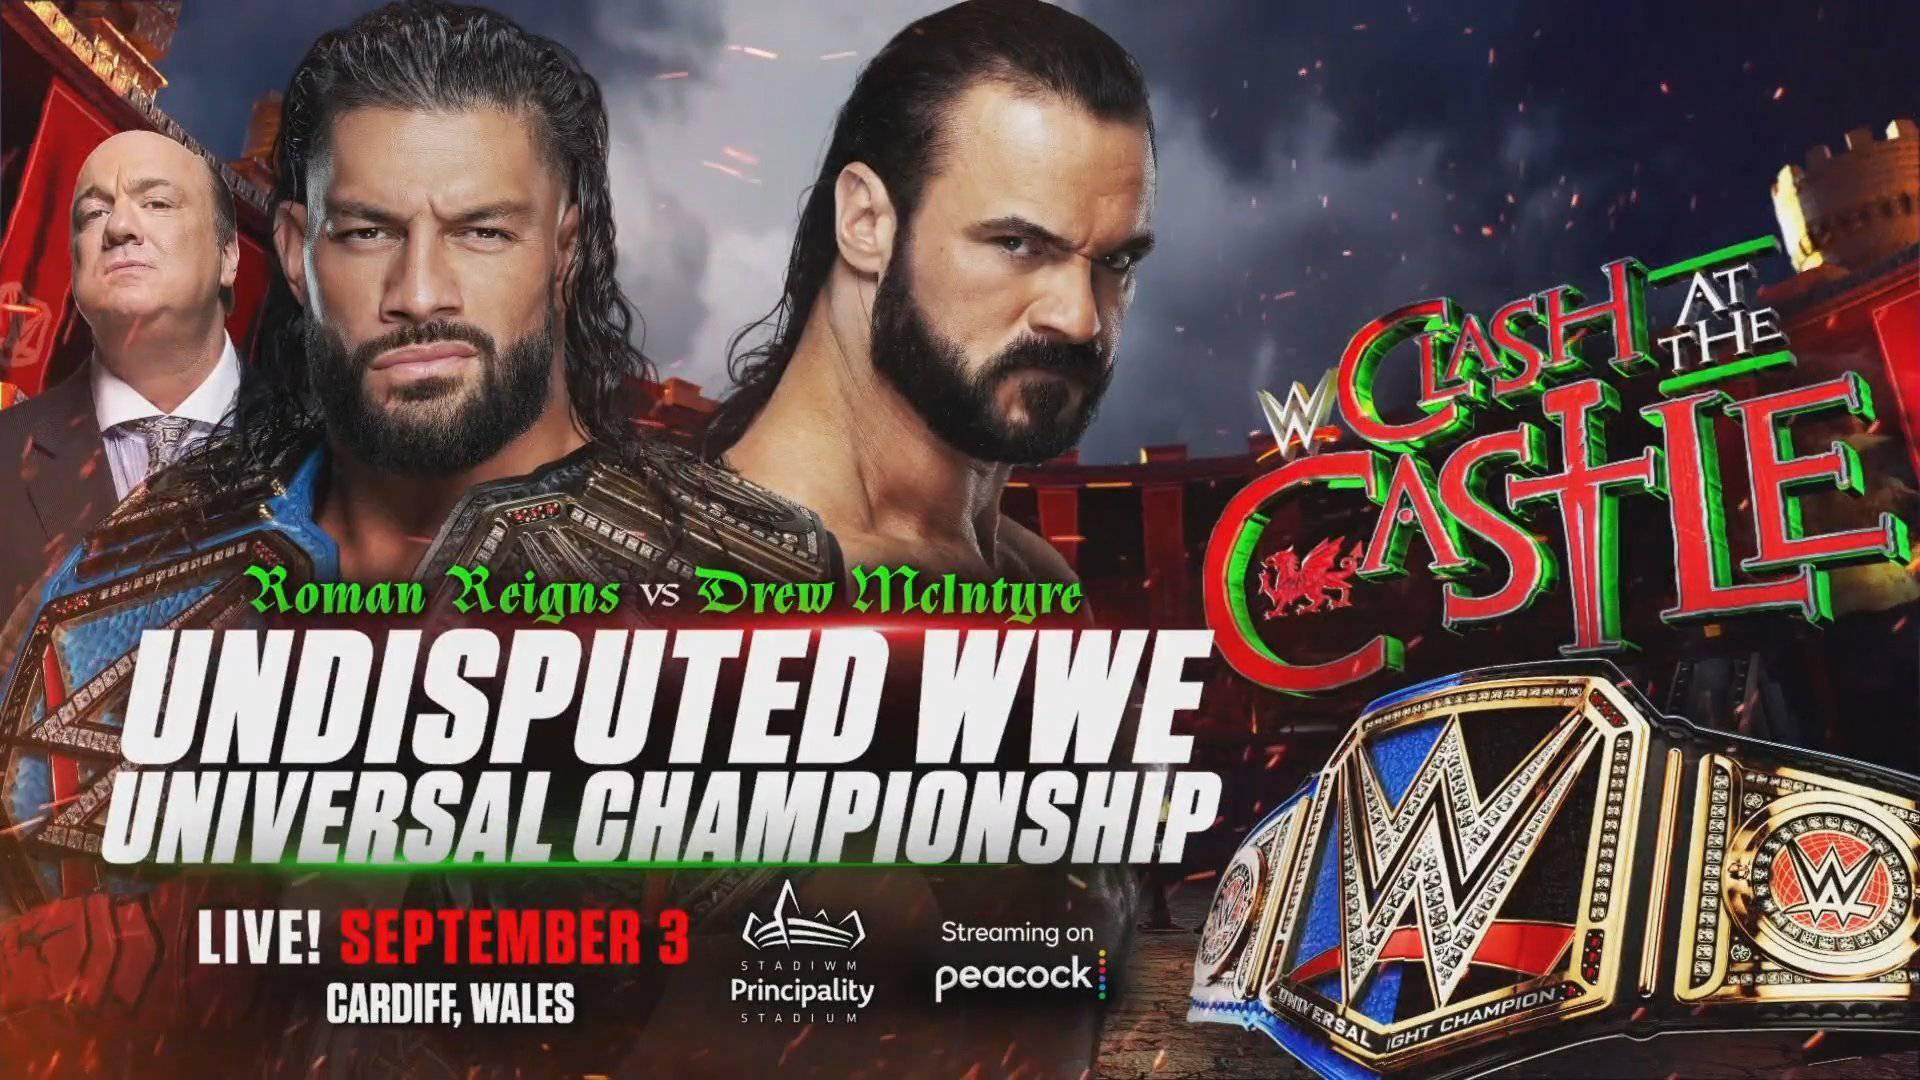 WWE Clash At The Castle Flyer